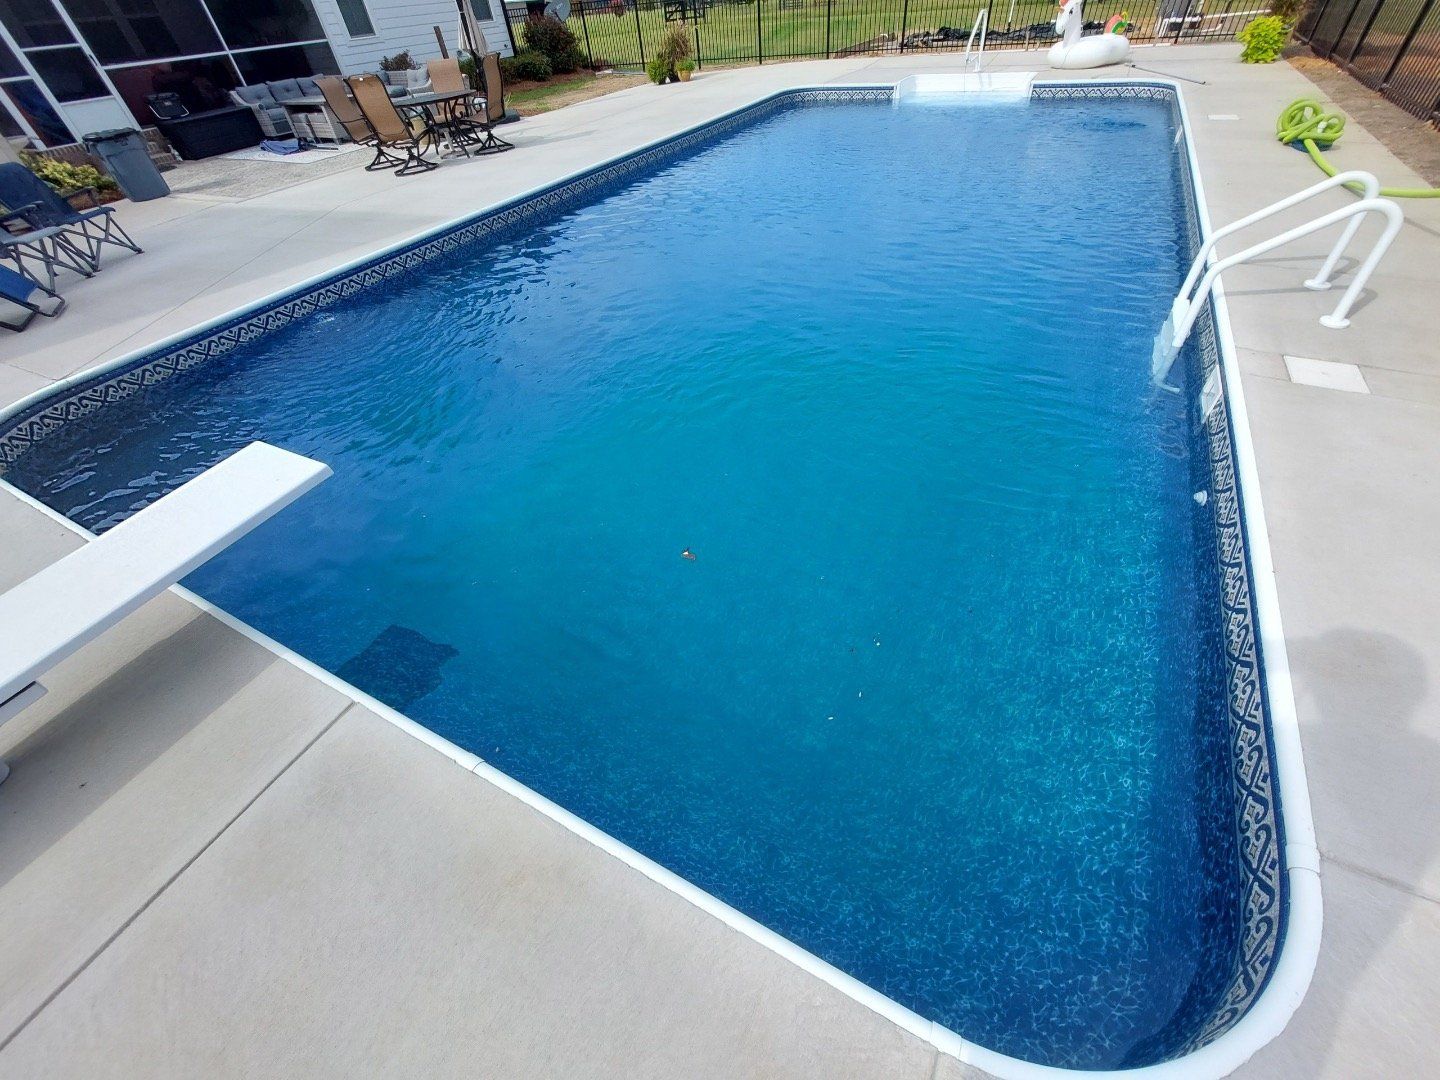 Pool Maintenance for Fayetteville, Raeford, Spring Lake, Hope Mills, and Ft. Bragg, NC.